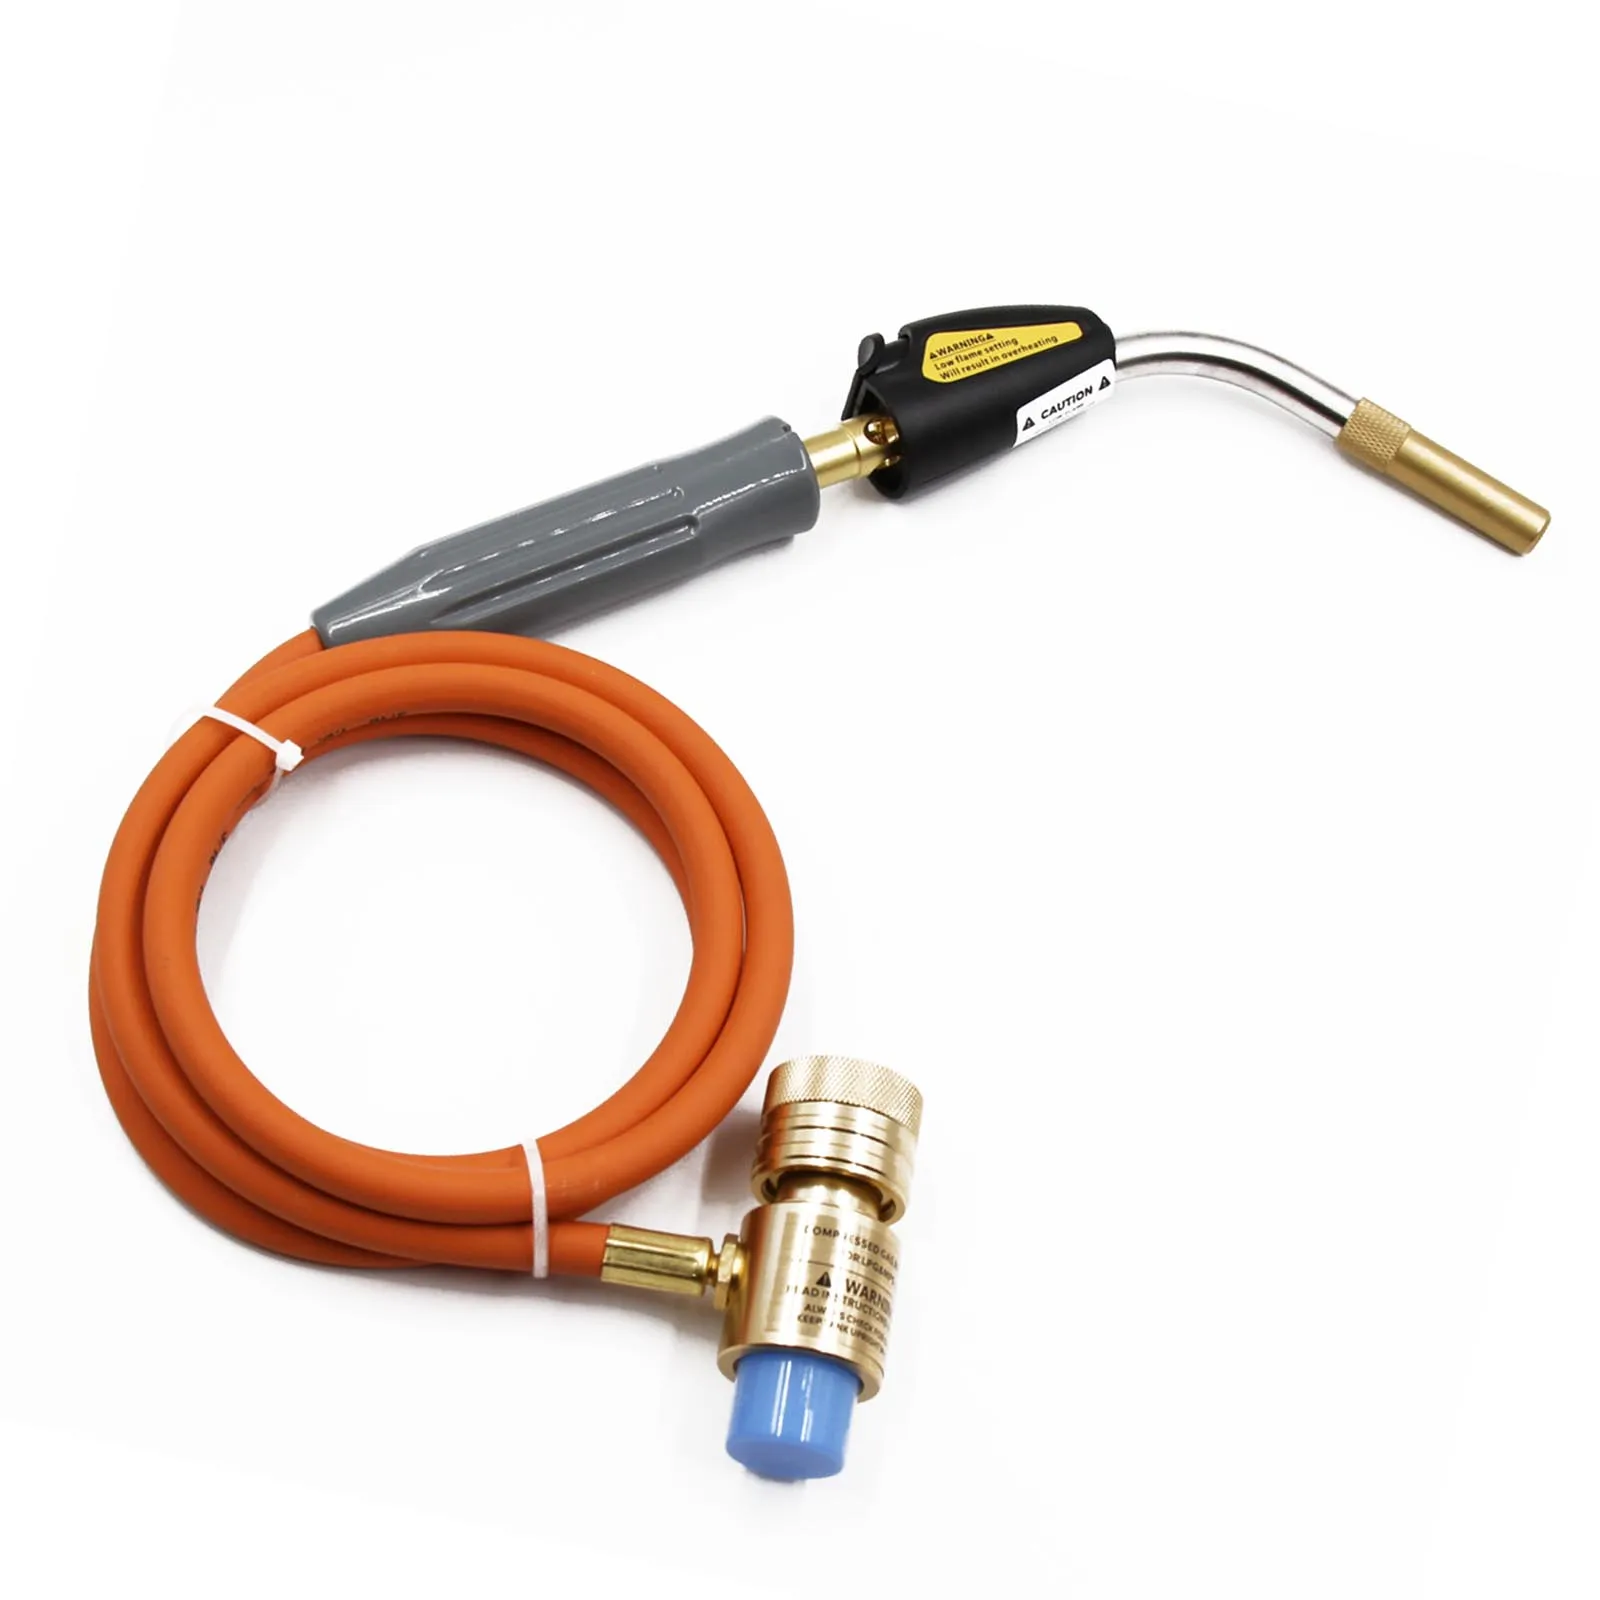 copper welding rod Gas Welding Propane Torch Self Ignition Trigger with 1.5m/5ft Hose Flame Adjustable MAPP Propane Blow Torch gas gas gas gas gas brass welding rod